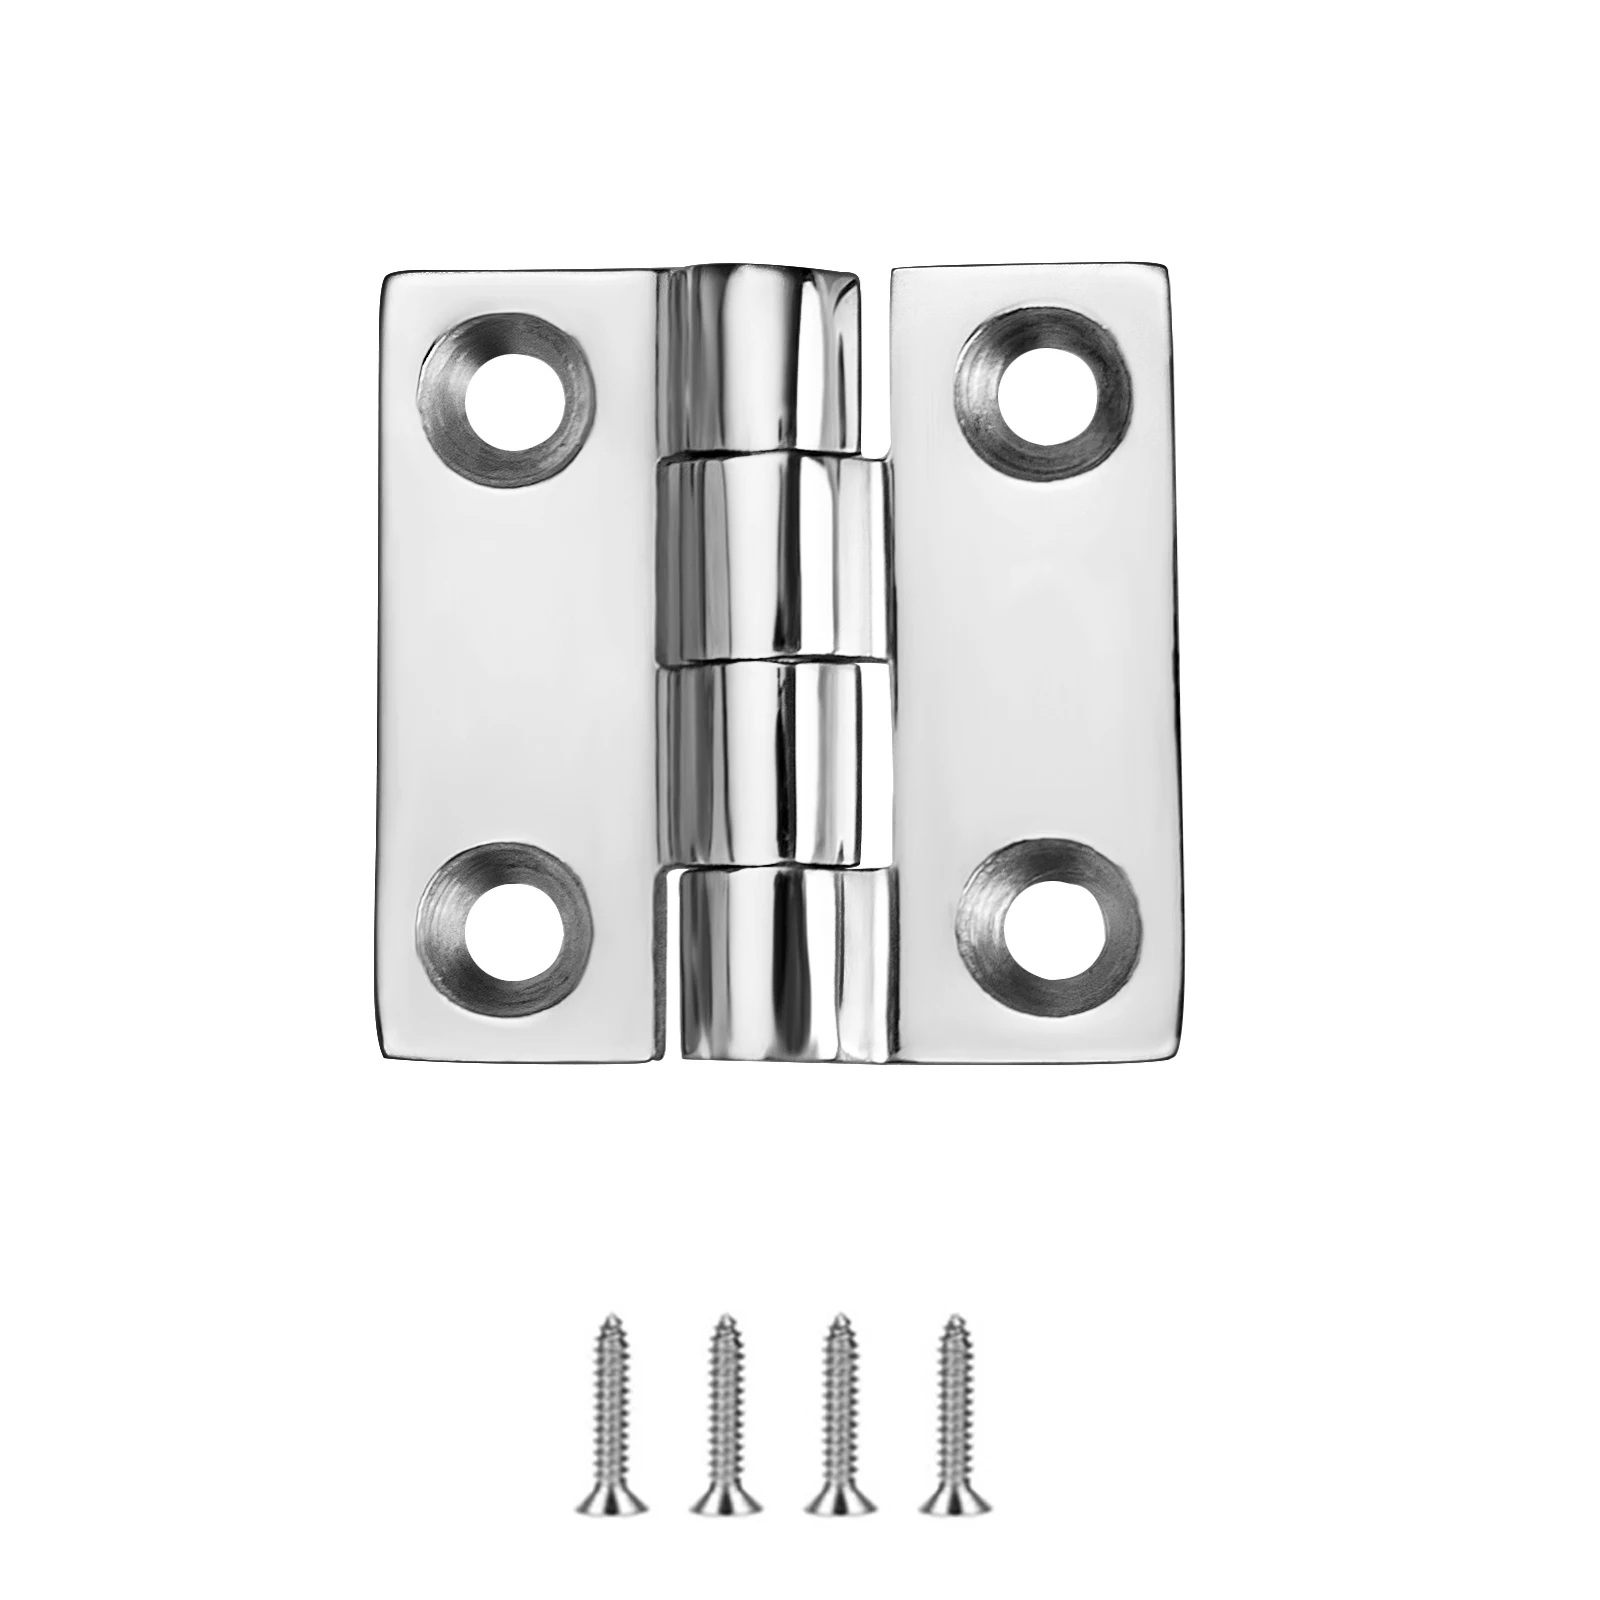 Stainless Steel Boat Hinges,Marine Grade Hinges,  2x2 Inches ( 50X50MM), Heavy Duty 316 Sswith Screws (1 Pcs)